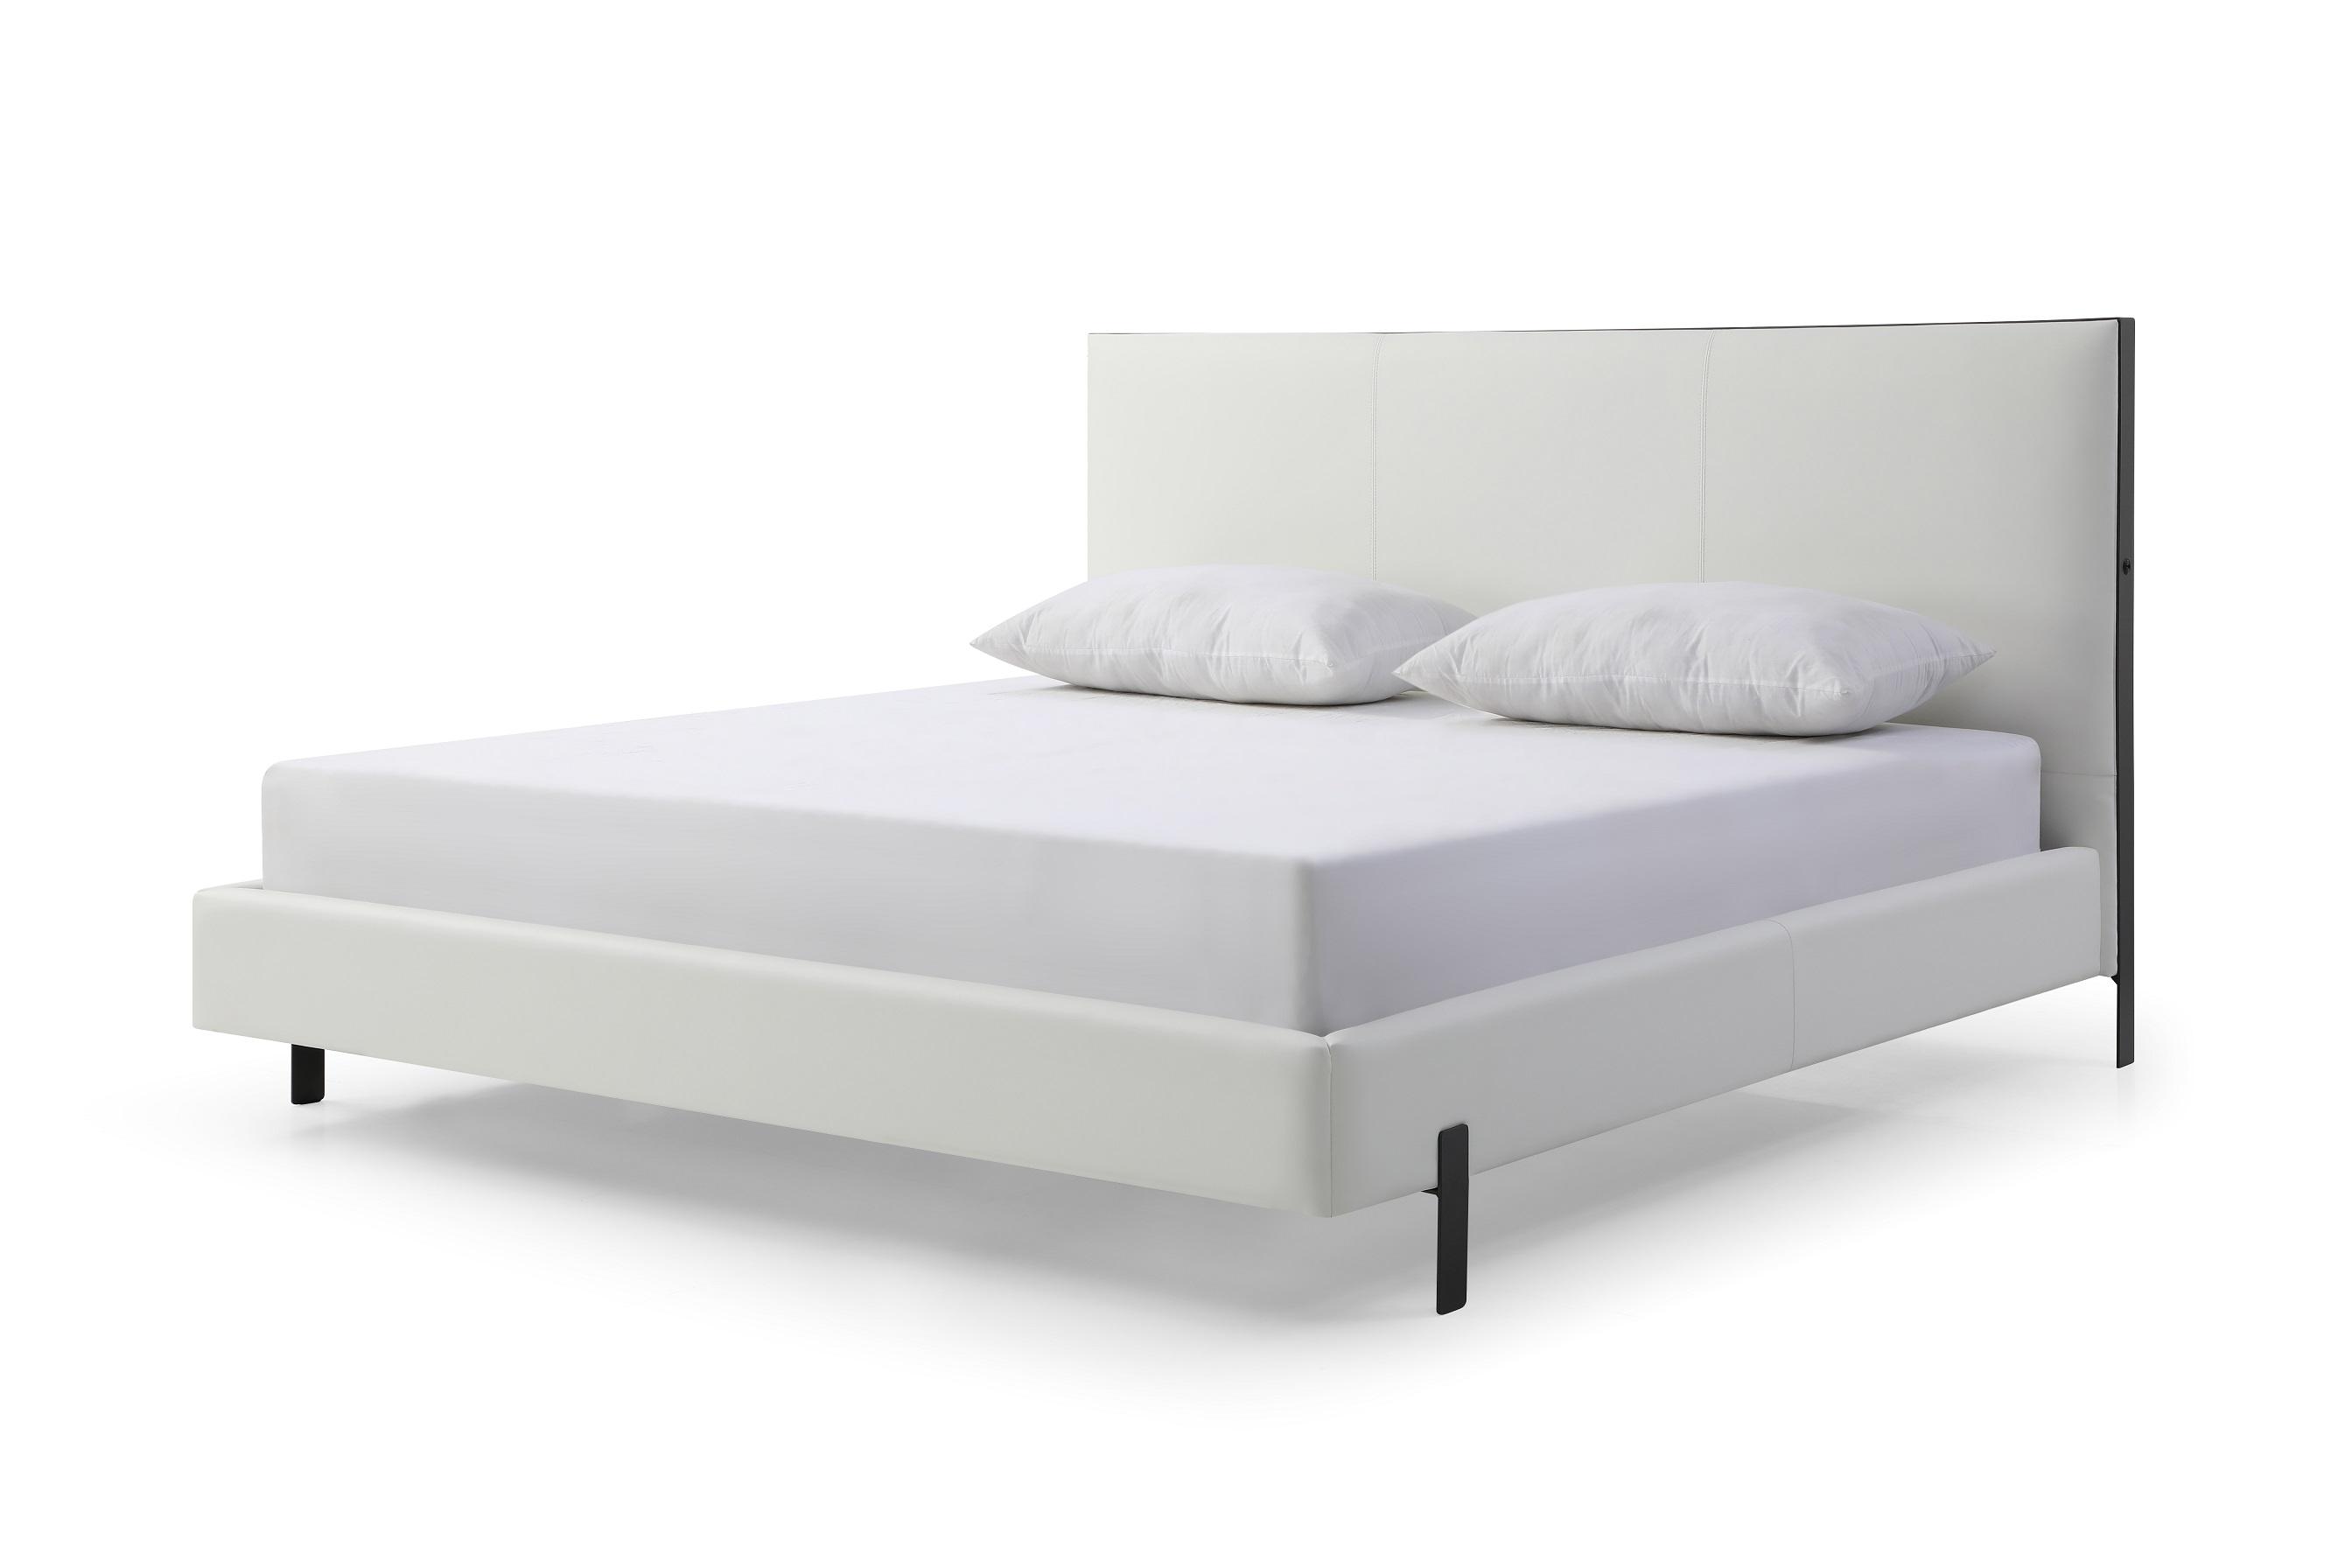 Modern Bed BK1690P-WHT Hollywood BK1690P-WHT in White Faux Leather